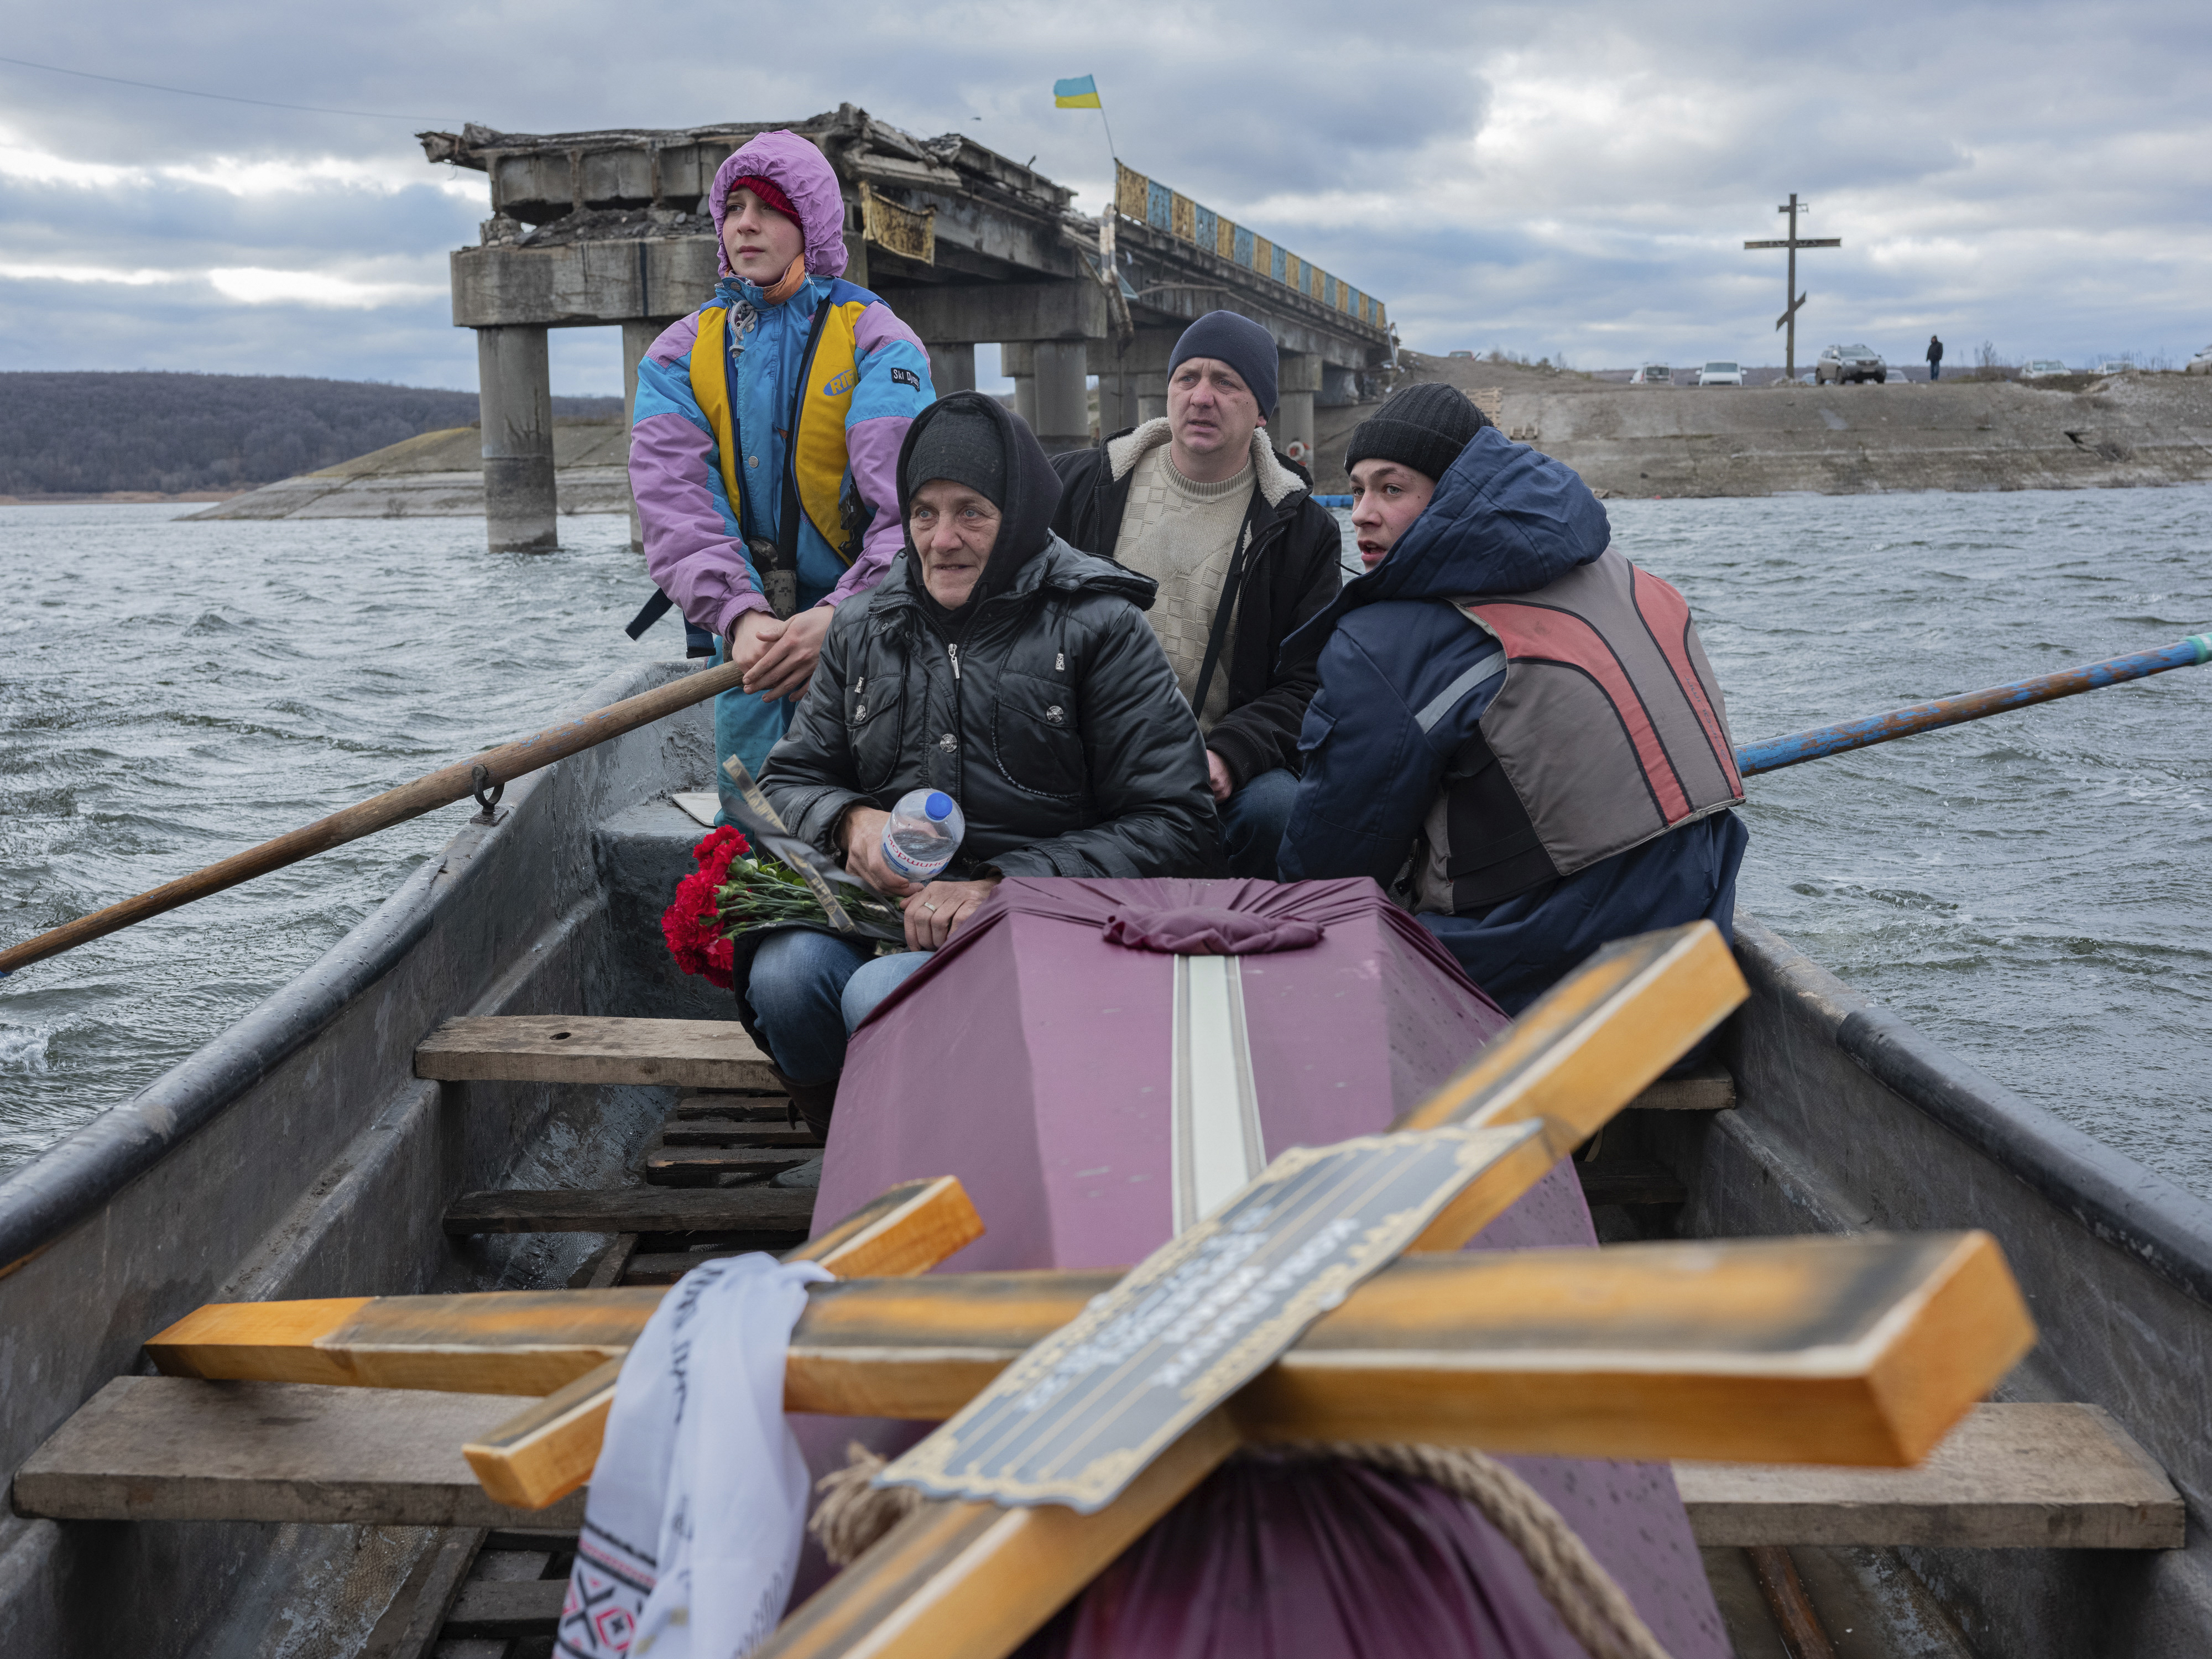 A woman sits in a boat crossing the Siverskyi-Donets river near Staryi-Saltiv, Kharkiv region on Wednesday Jan. 4, 2023, transporting the coffin containing her dead son, a soldier who was killed in fighting with Russians. (AP Photo/Erik Marmor)